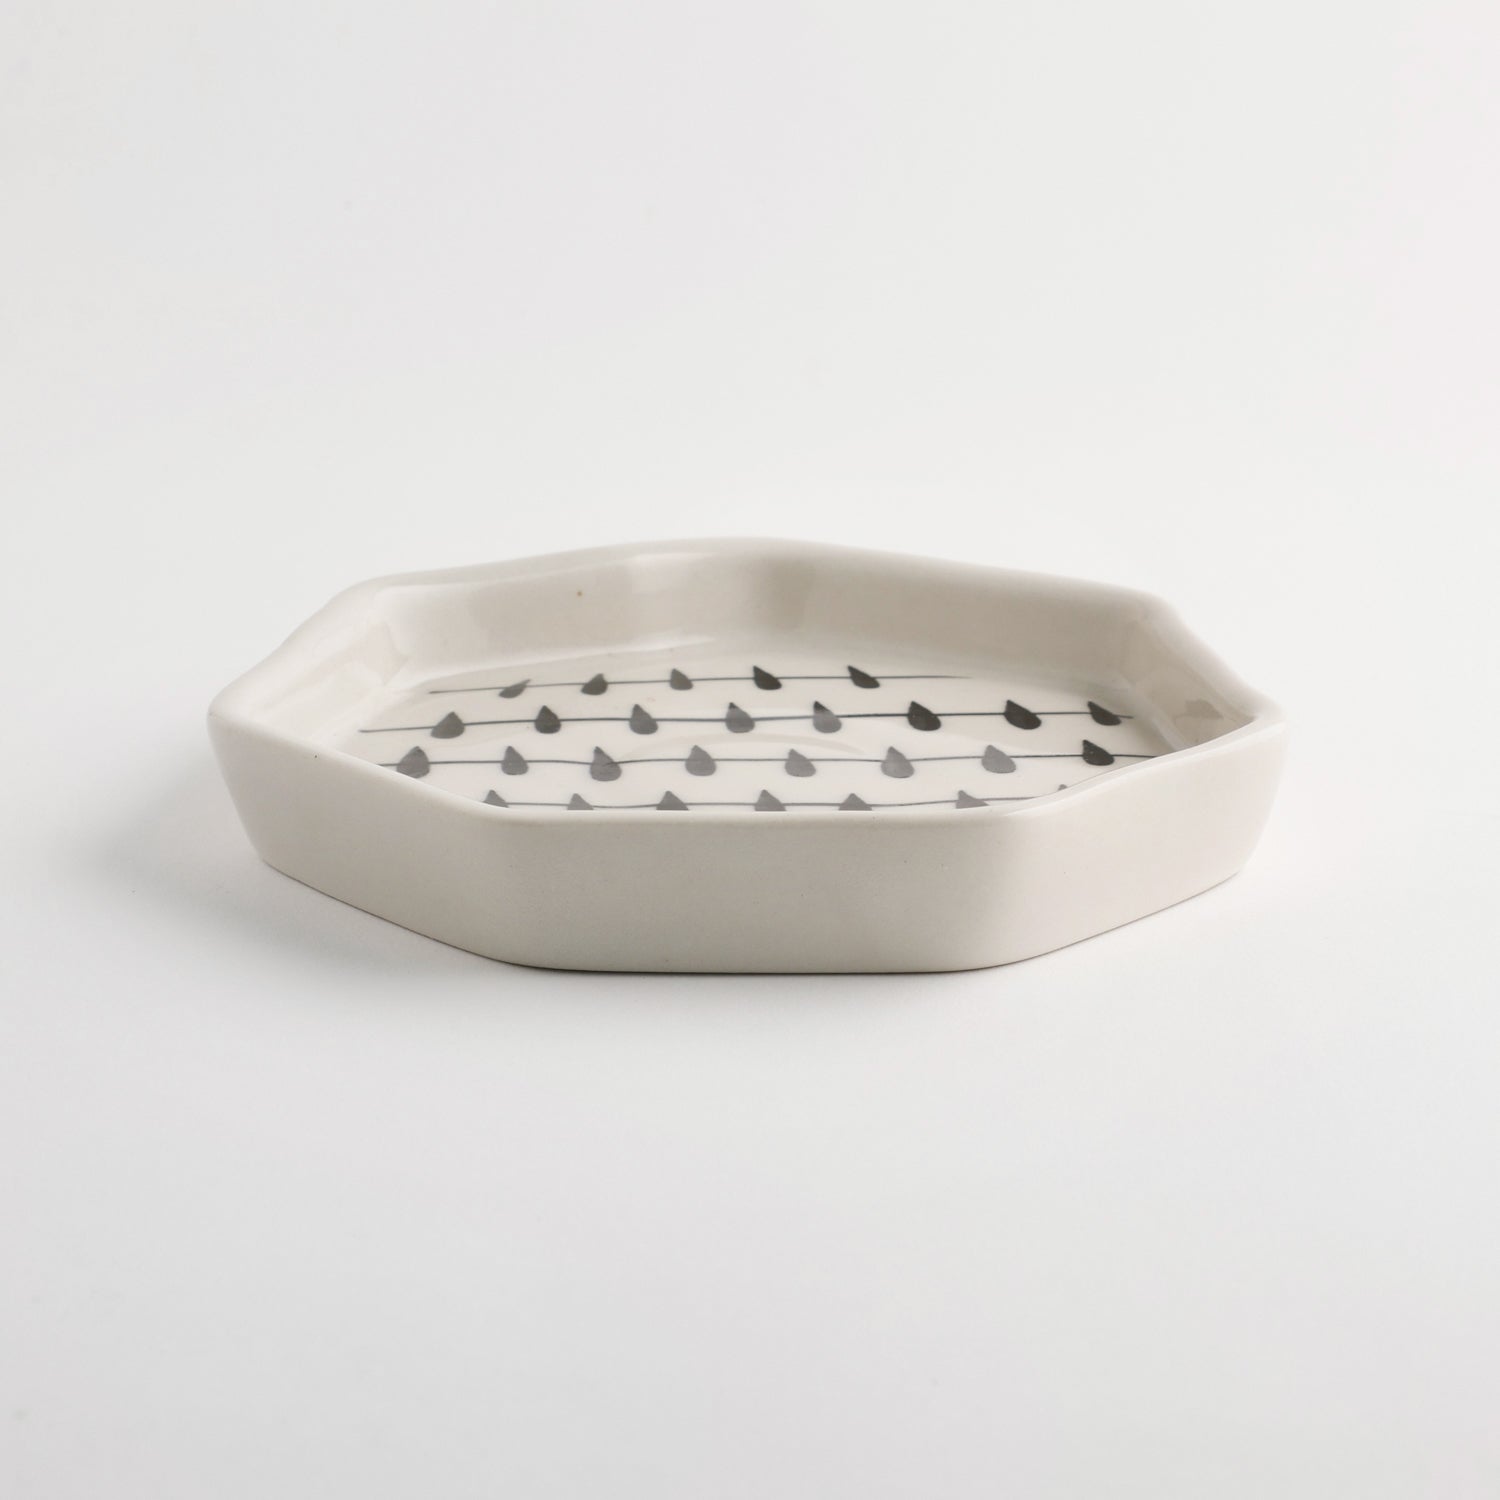 Ceramic Wired Snack Plate - Septagon 6.5 x 1